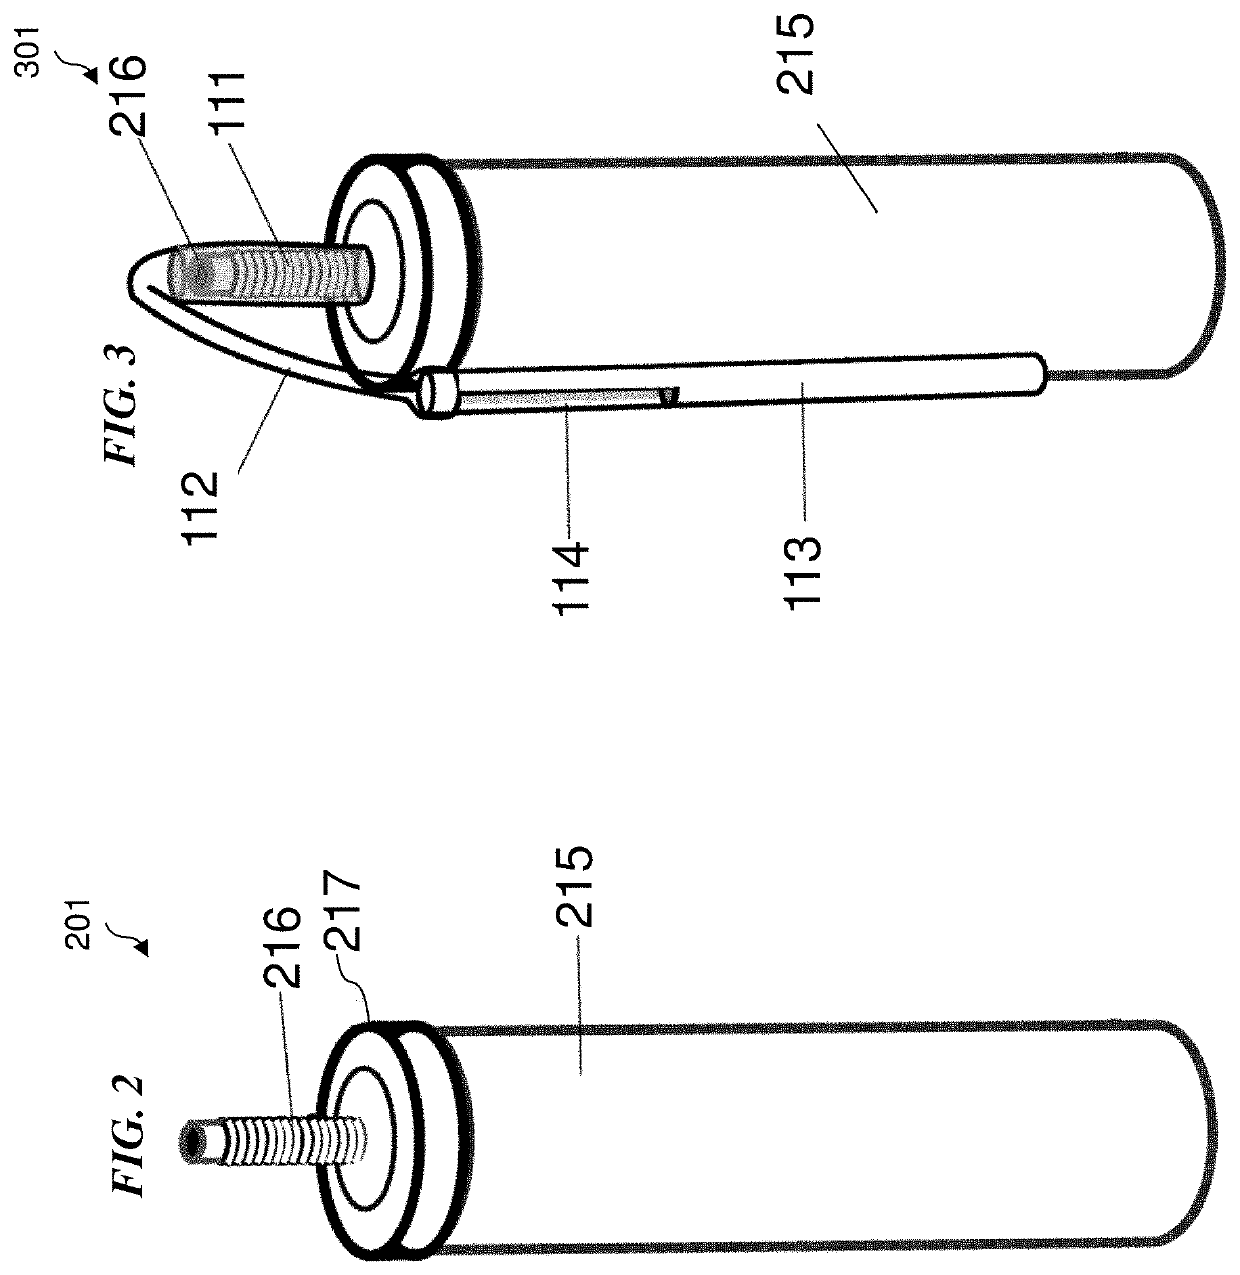 Device and method for water priming microporous-carbon water filters using negative pressure